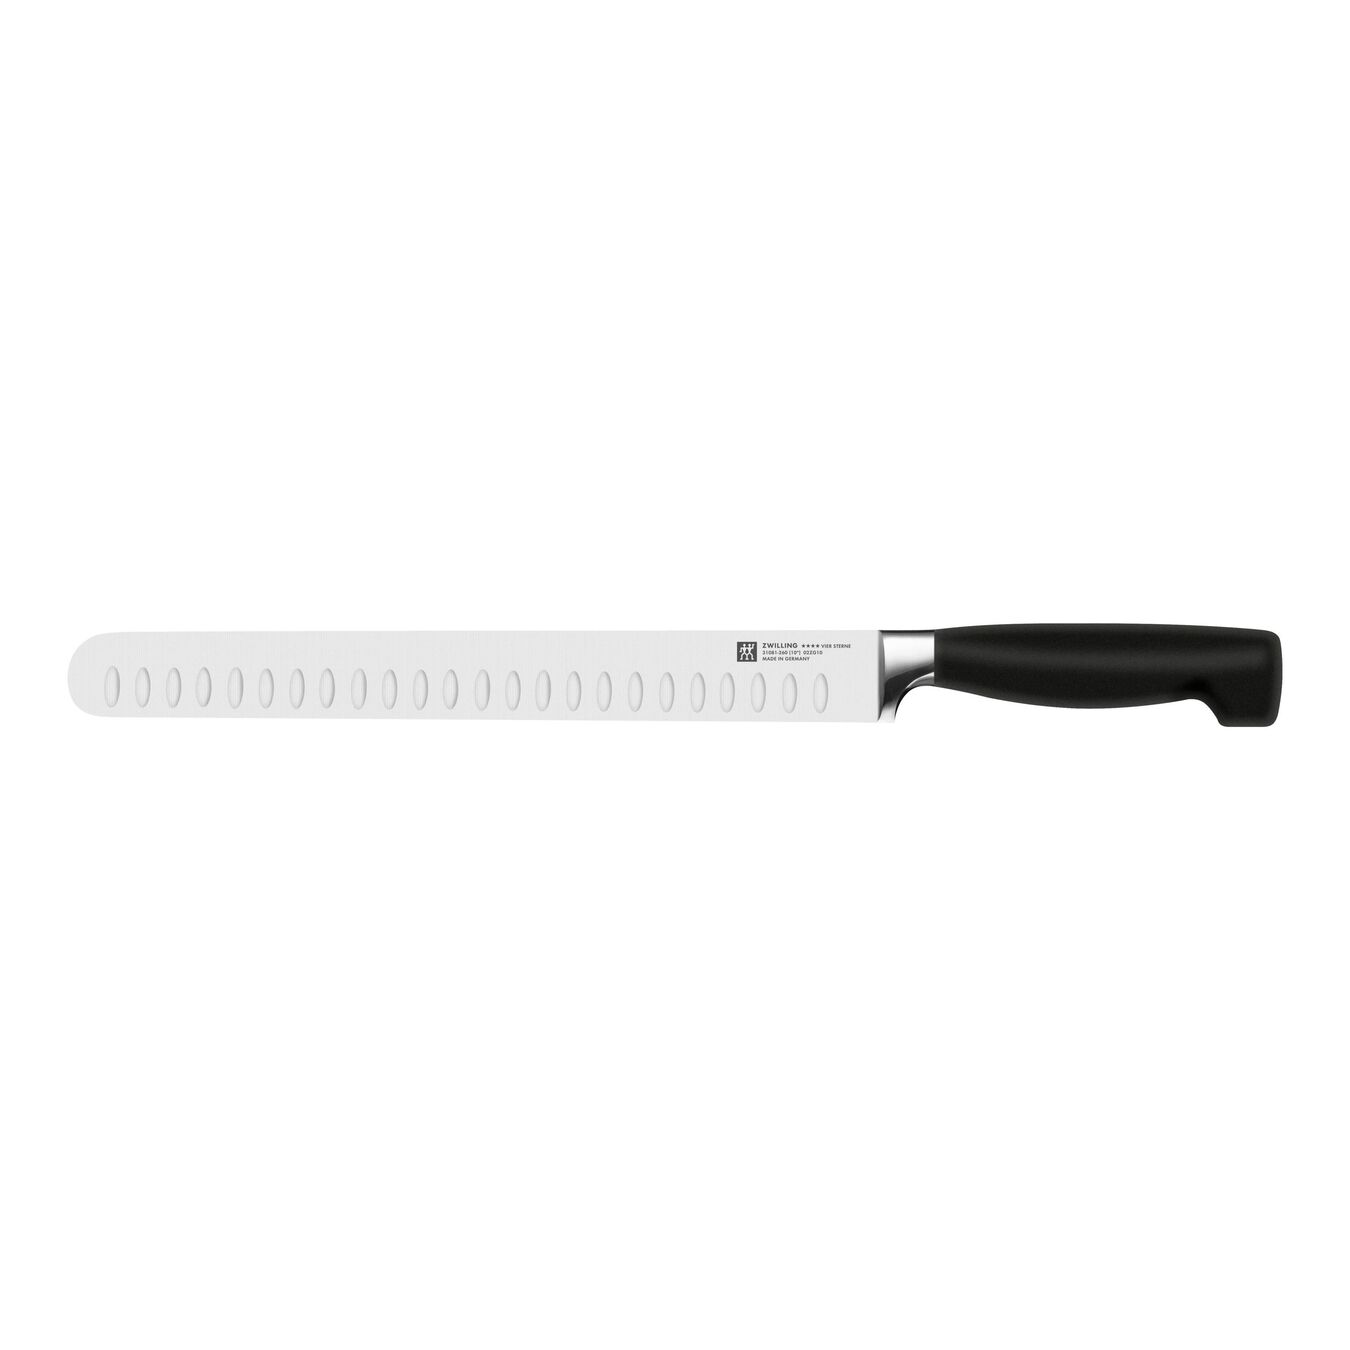 10-inch, Hollow Edge Slicing Knife,,large 1